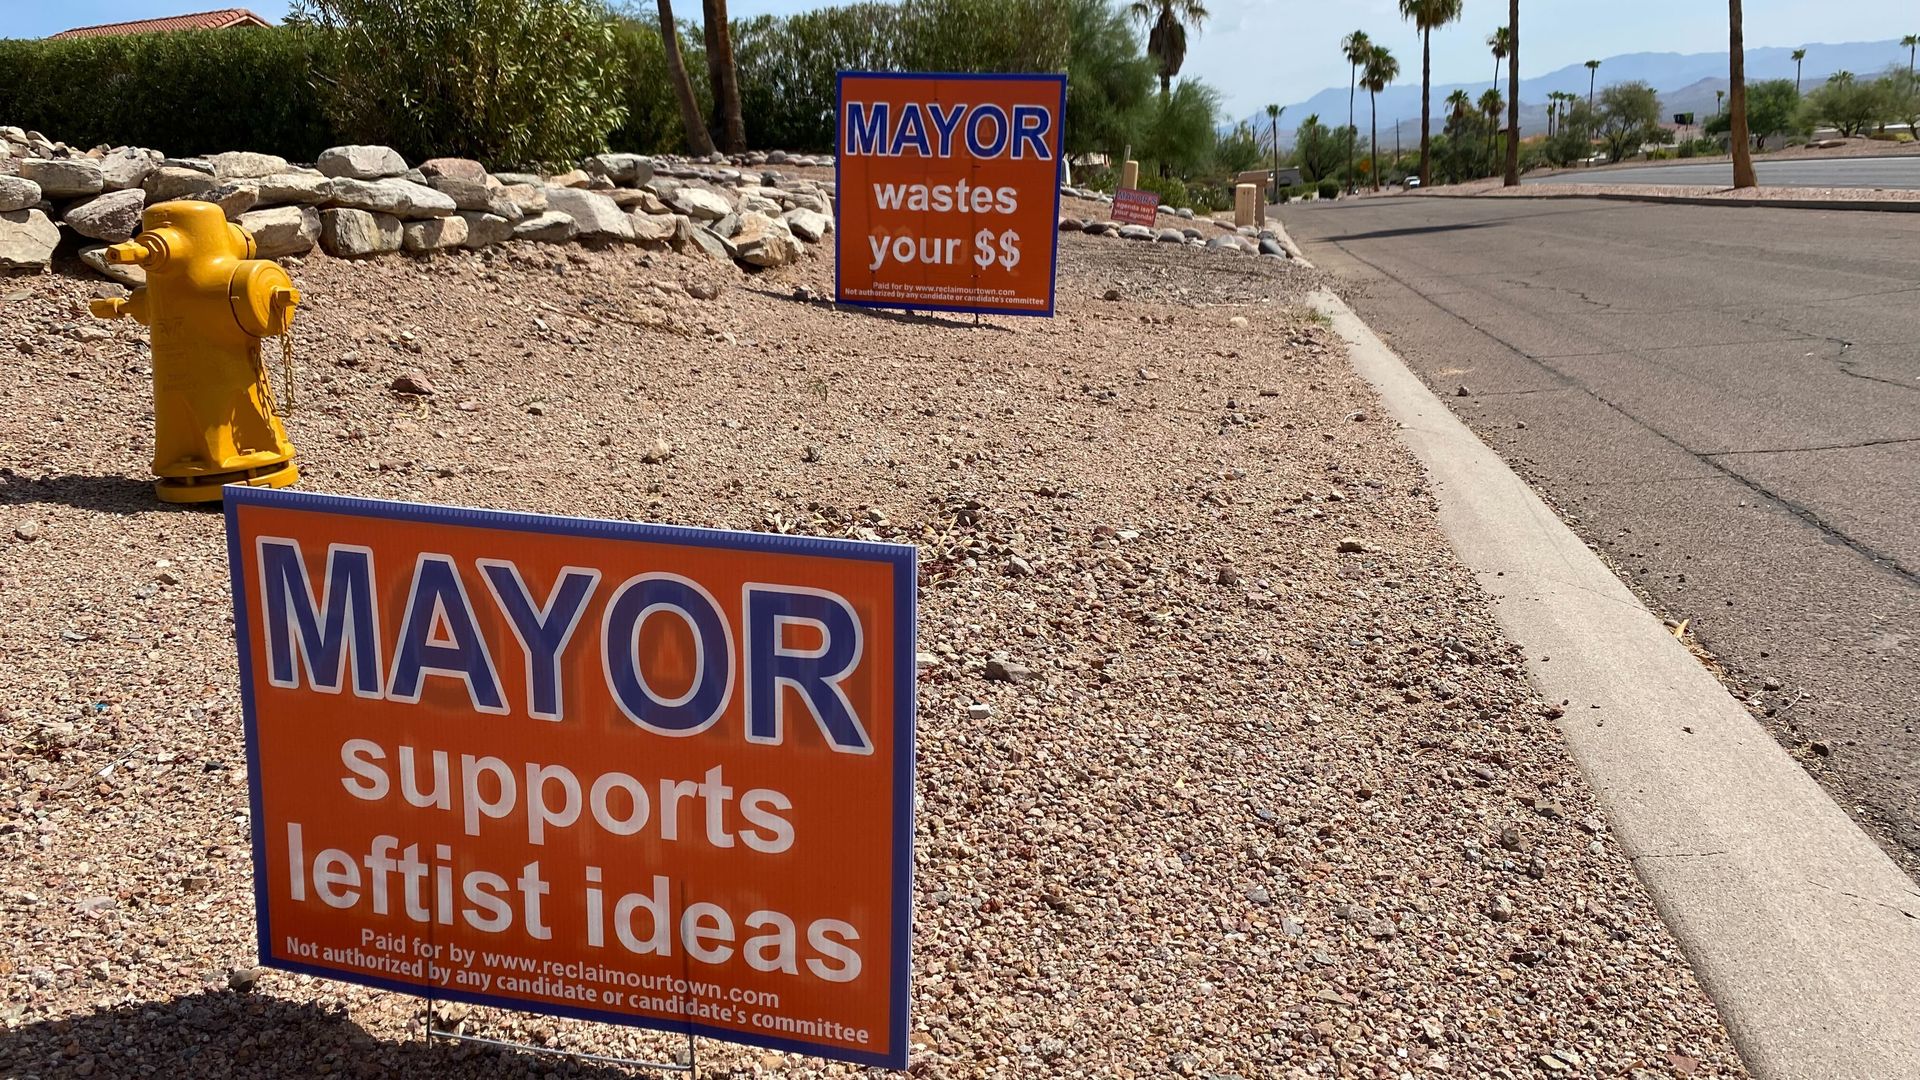 Campaign signs on the side of the road that say "MAYOR supports leftist ideas."